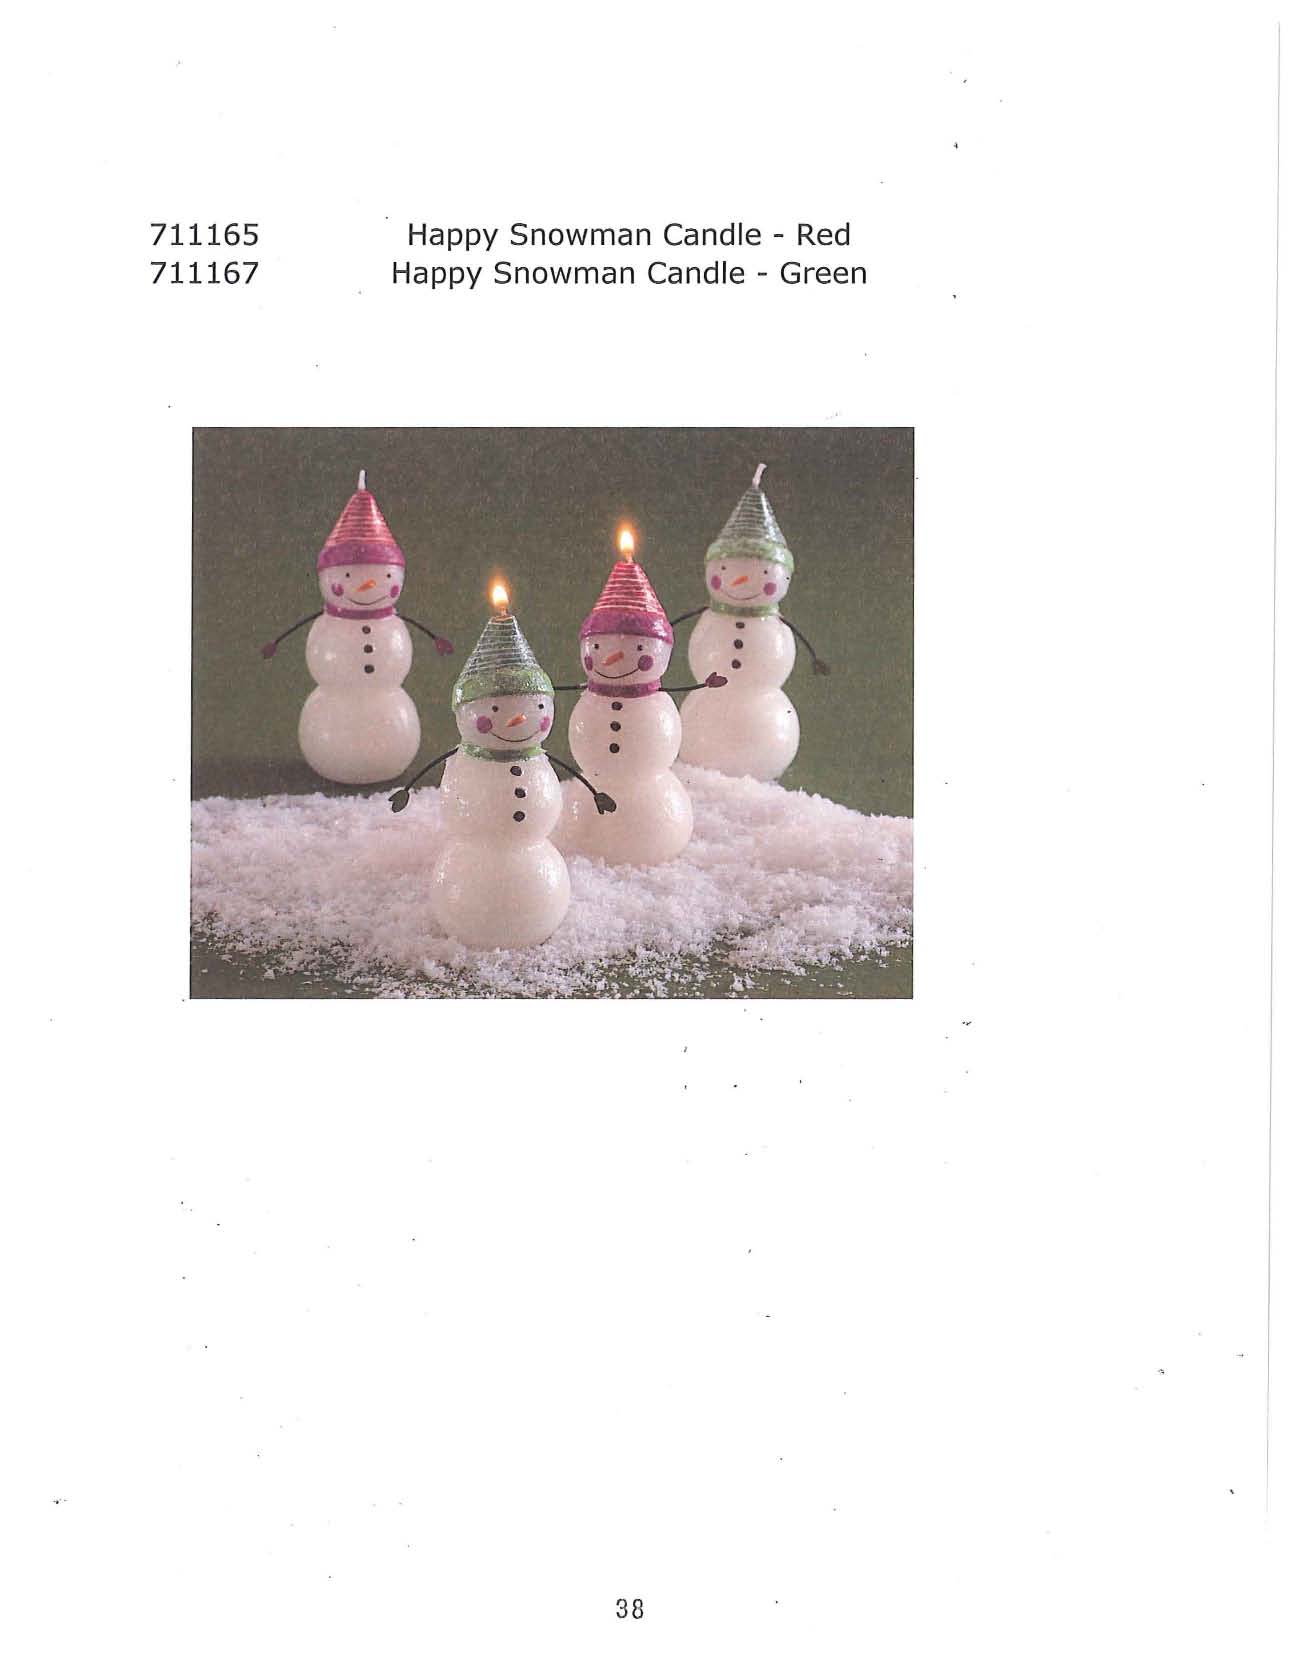 Happy Snowman Candle - Red and Green